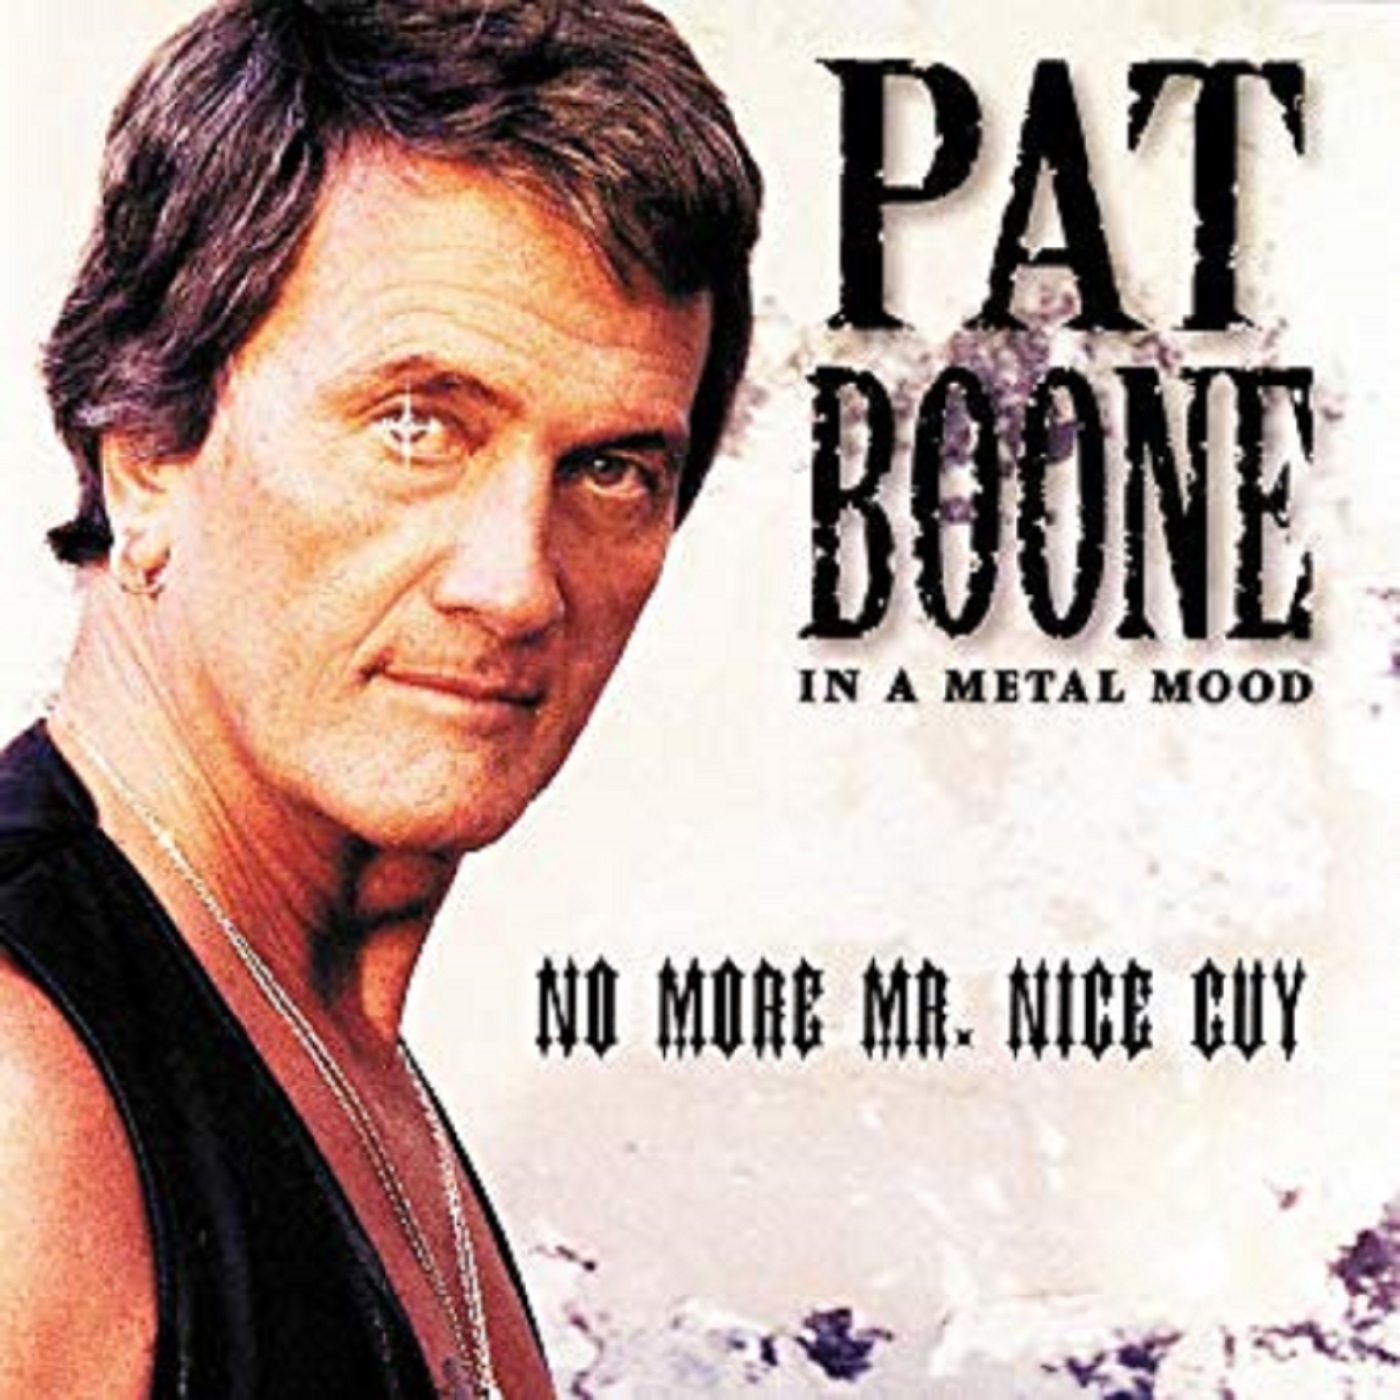 Pat Boone's "In A Metal Mood" (with Rick Reid)